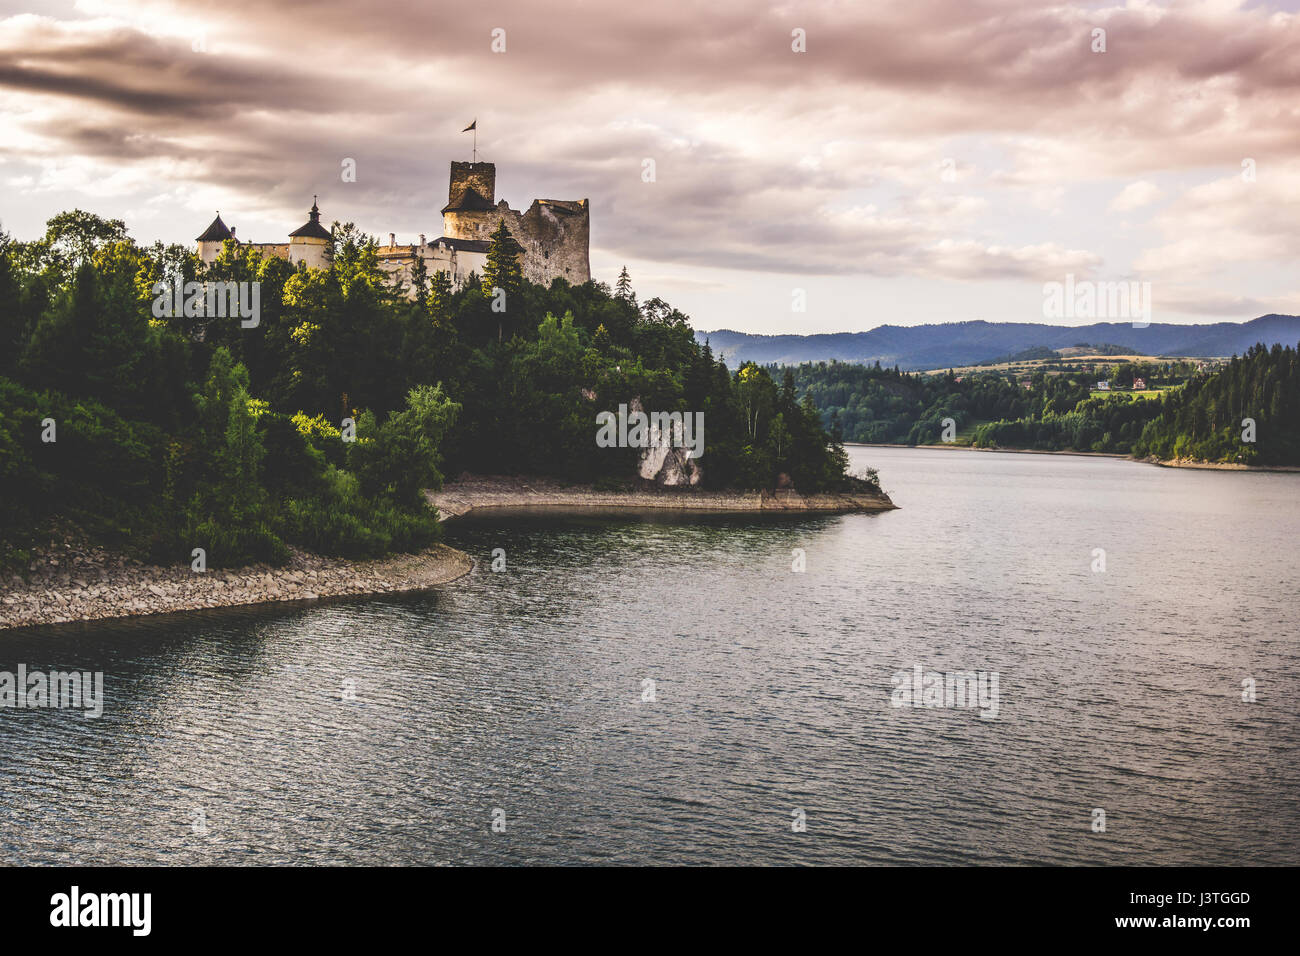 Niedzica castle on a hill by the Czorsztyn lake during a beautiful sunset. Stock Photo